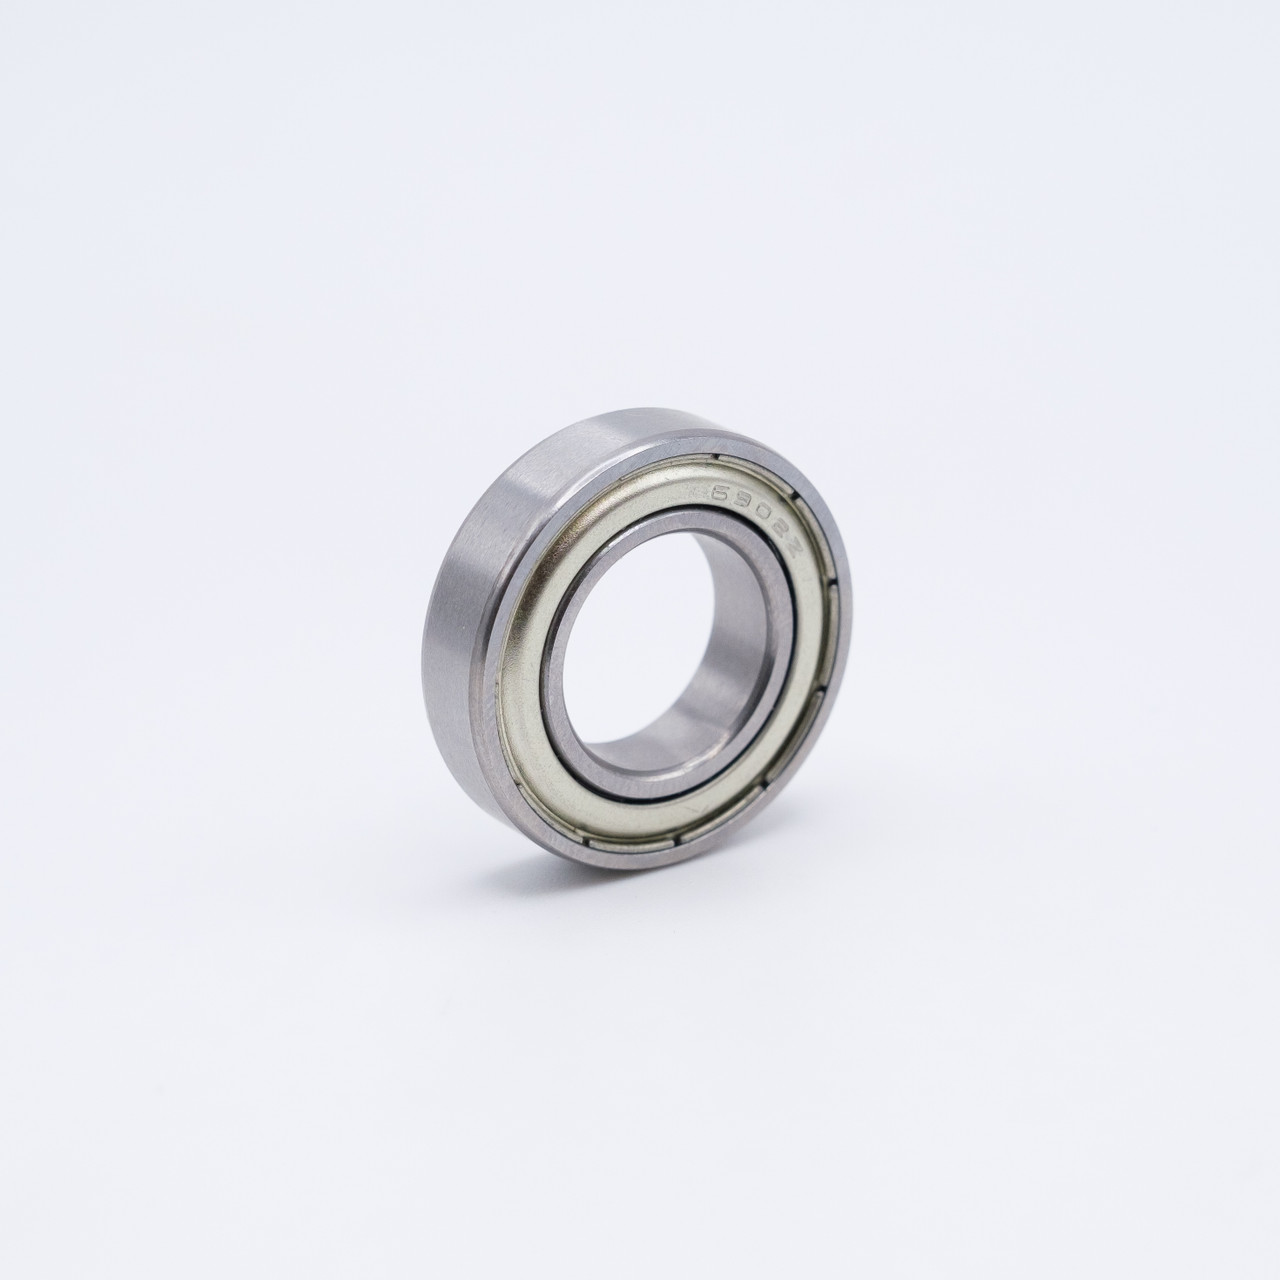 SS6902-ZZ Stainless Steel Ball Bearing 15x28x7 Angled View